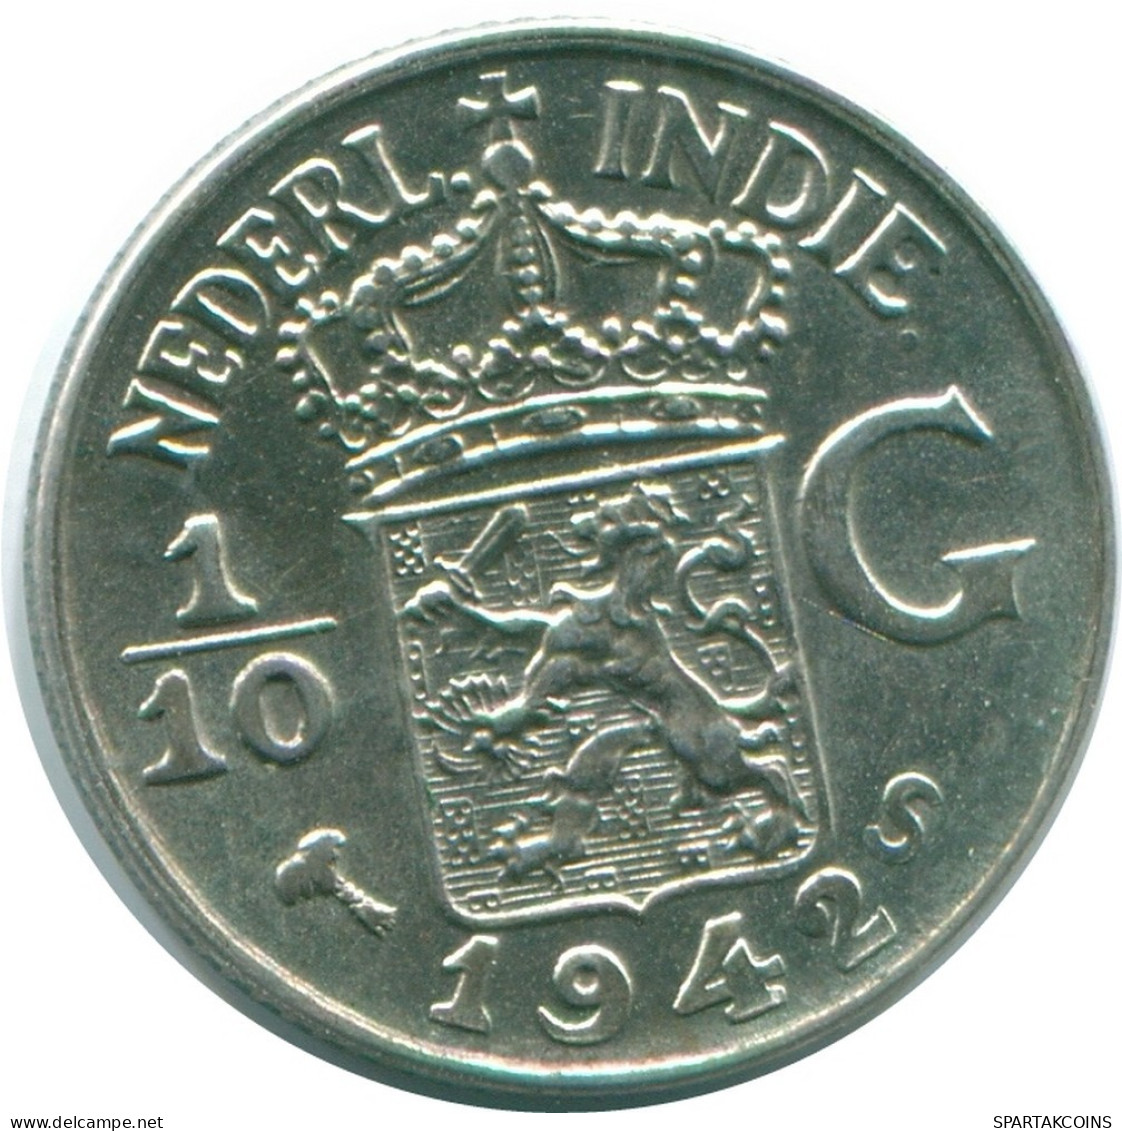 1/10 GULDEN 1942 NETHERLANDS EAST INDIES SILVER Colonial Coin #NL13878.3.U.A - Indie Olandesi